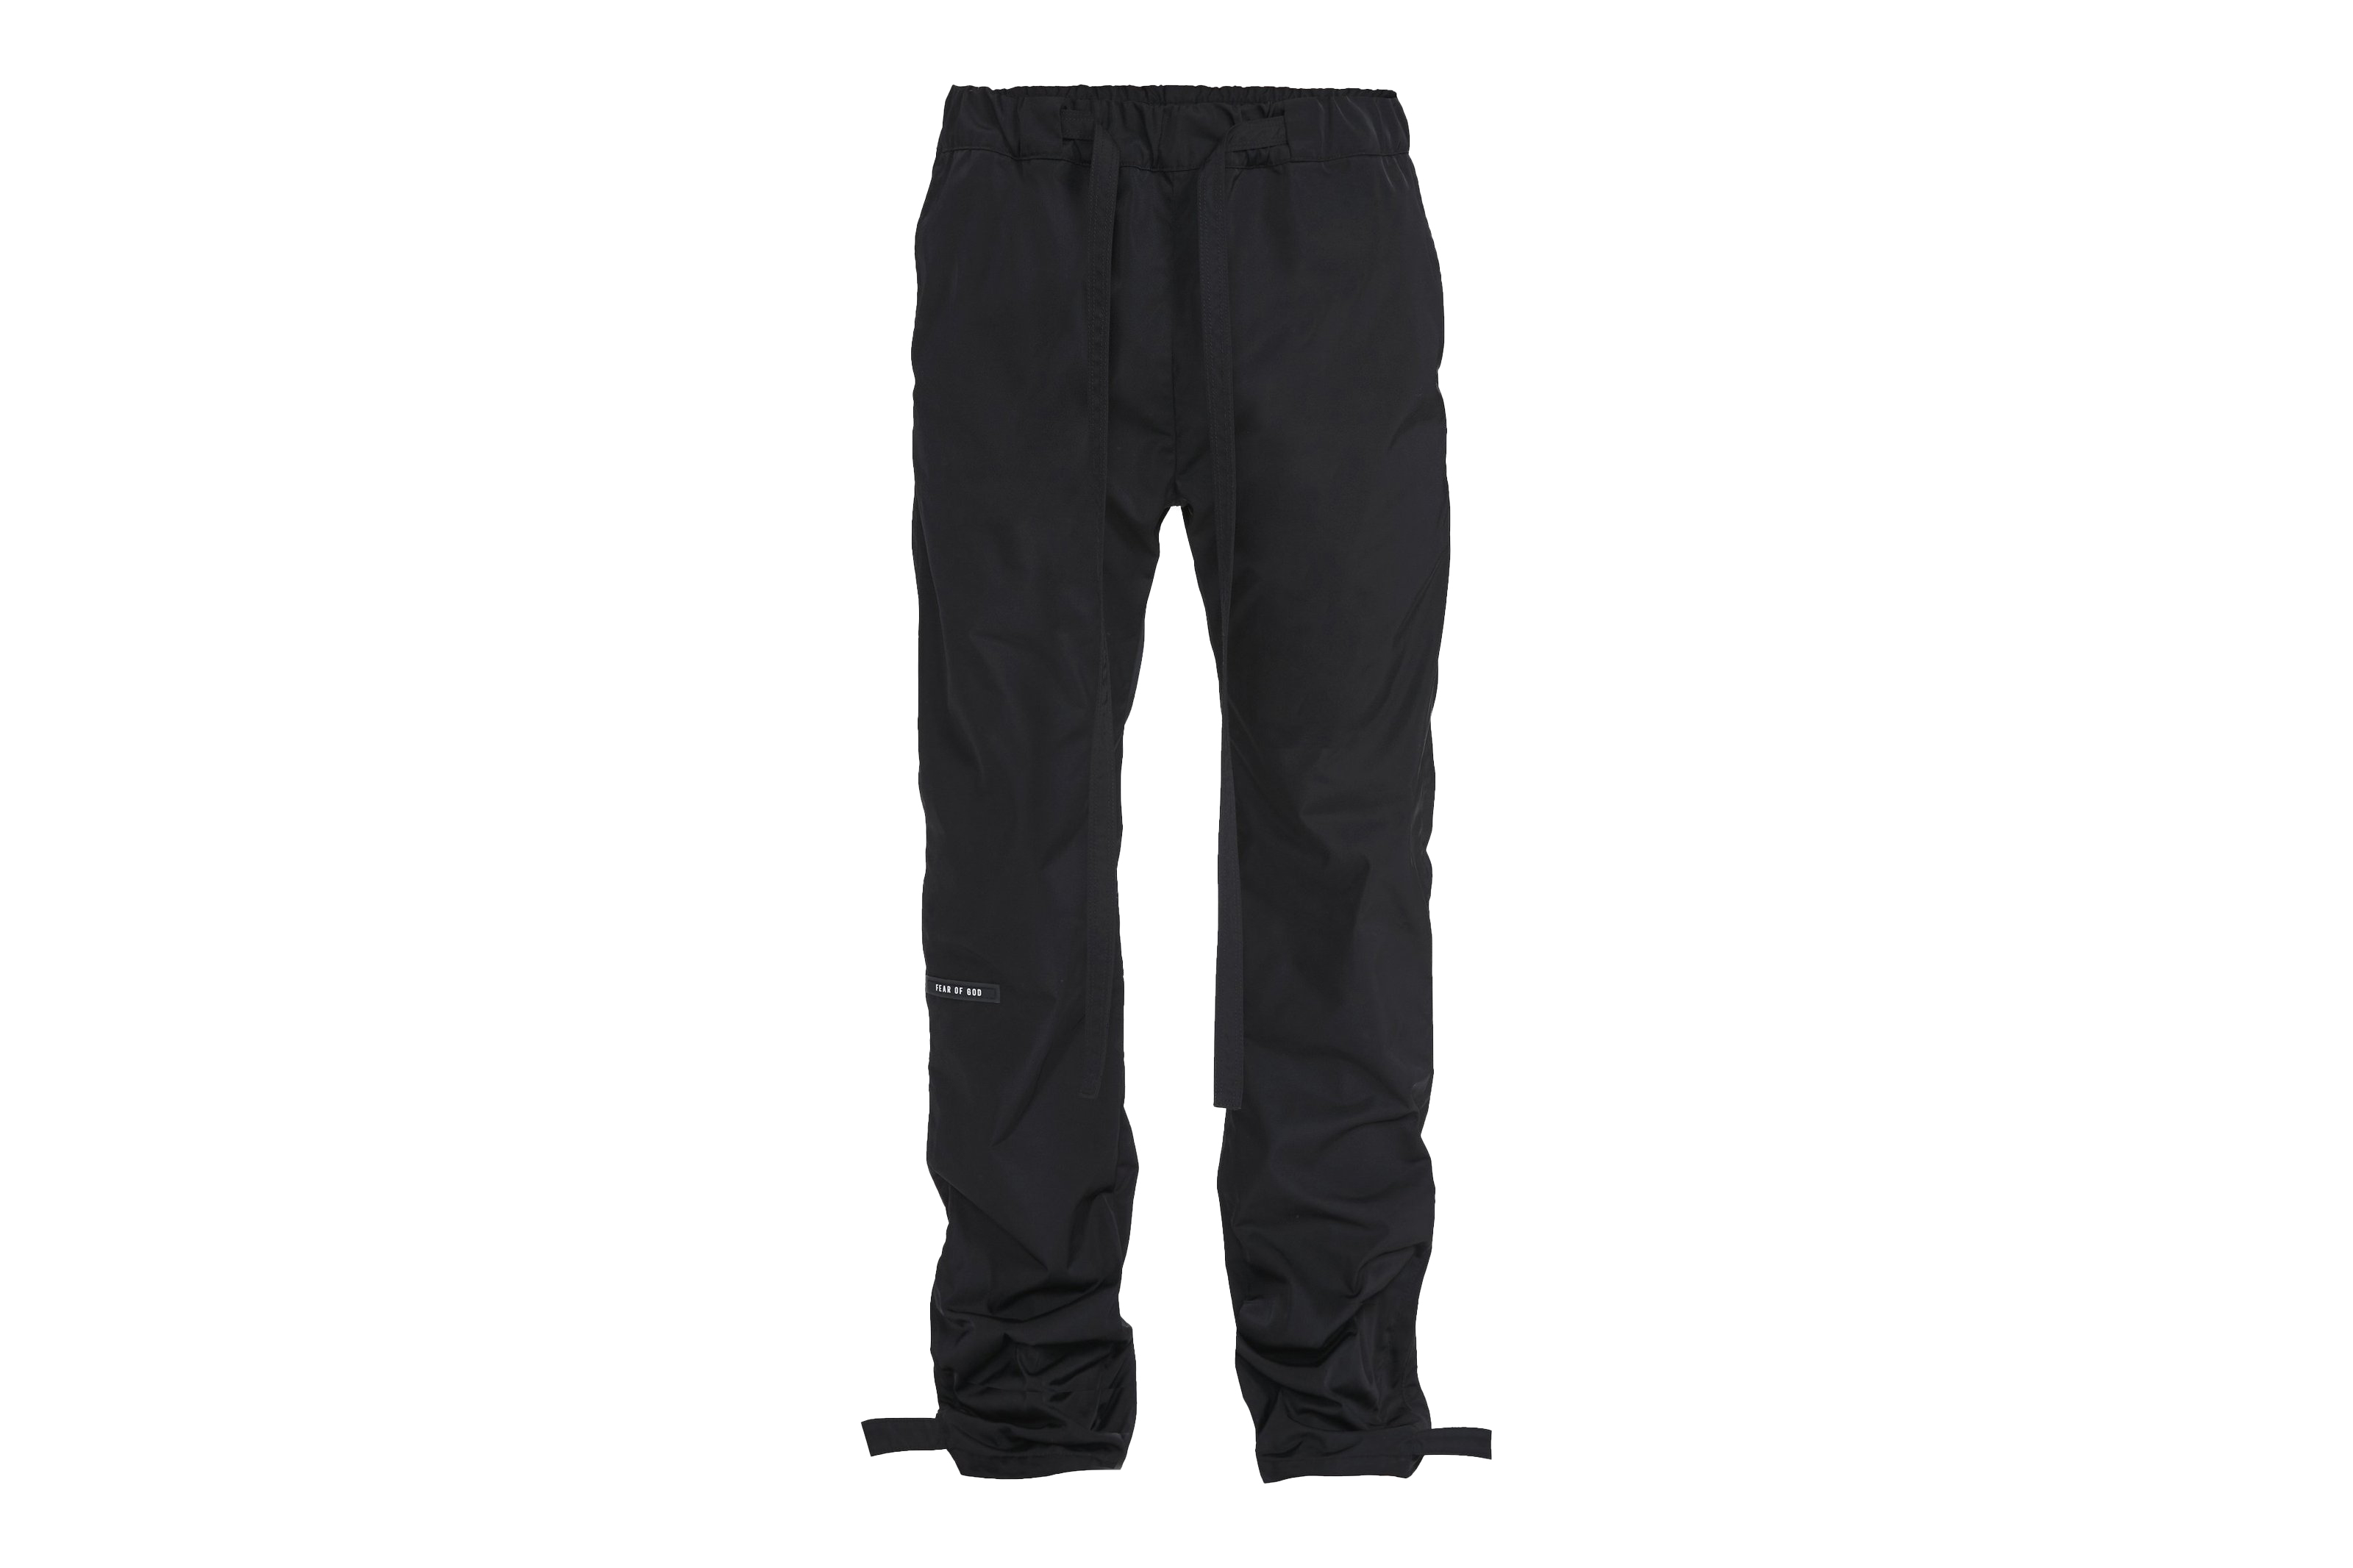 FEAR OF GOD Baggy Nylon Lounge Pants Black - SIXTH COLLECTION